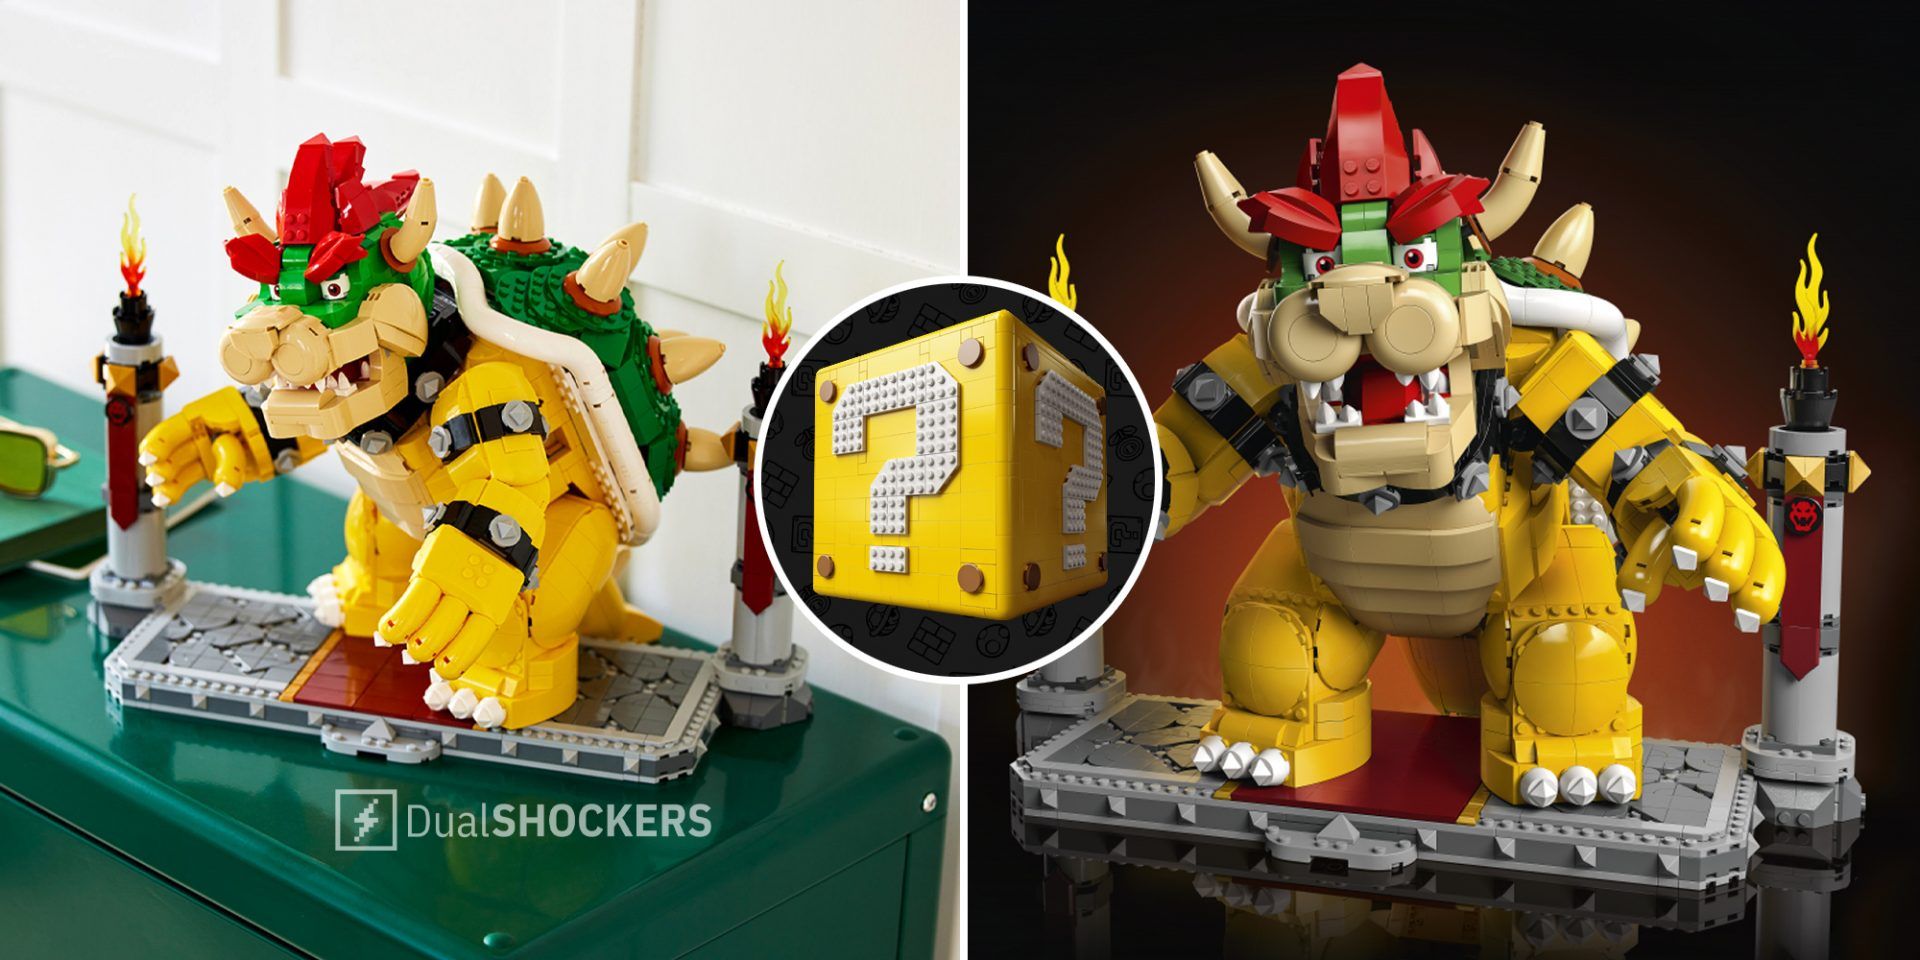 Lego Bowser set on left and right, Lego Question Block set in middle